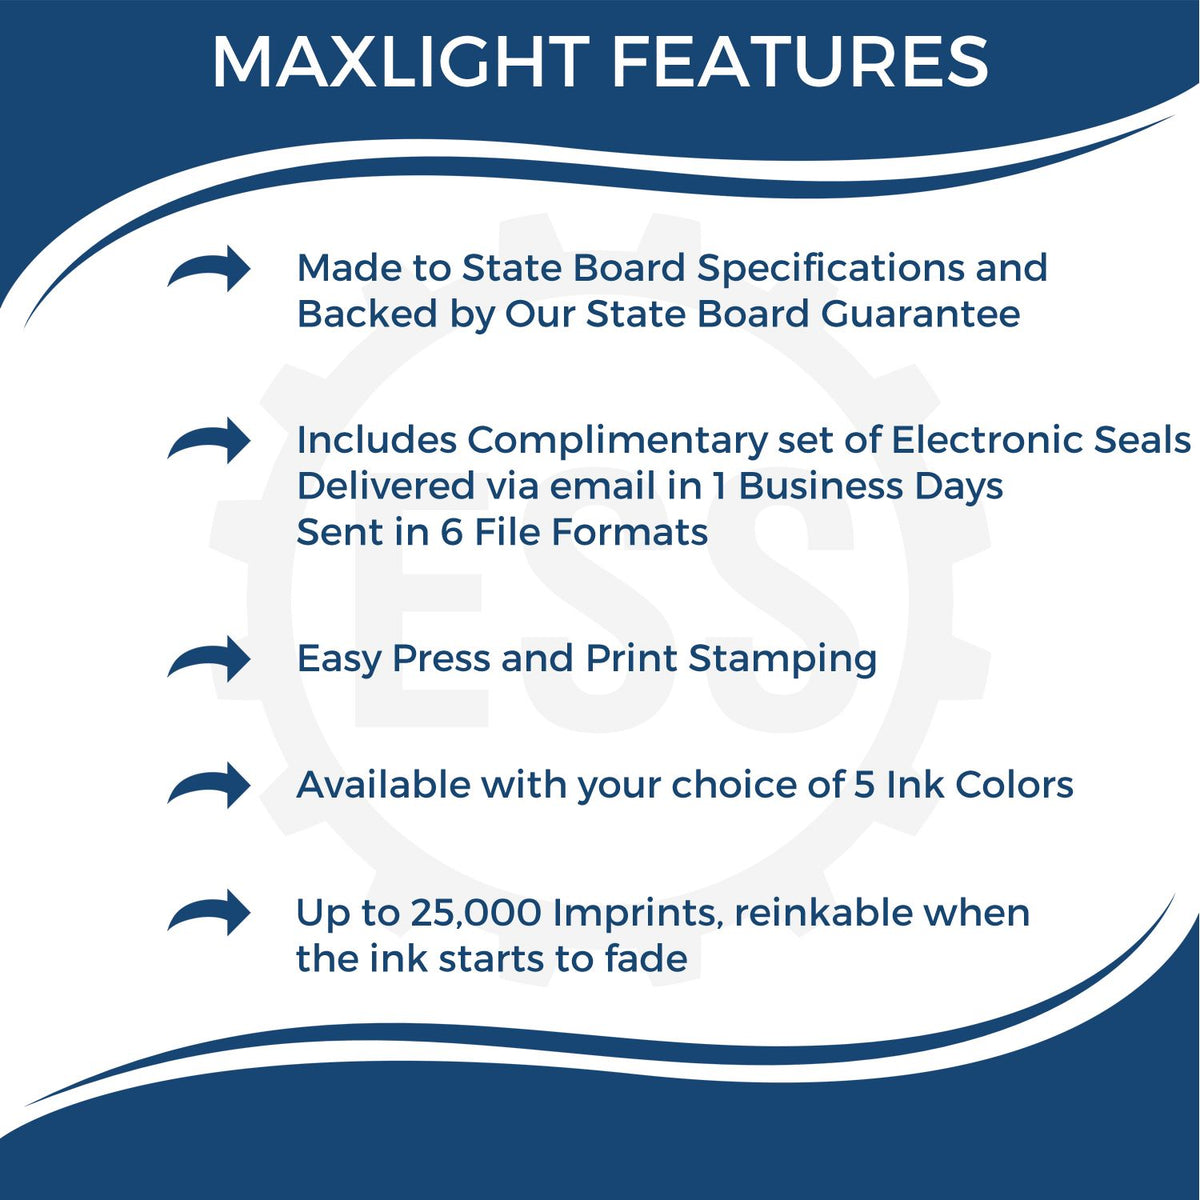 A picture of an infographic highlighting the selling points for the Premium MaxLight Pre-Inked South Carolina Landscape Architectural Stamp